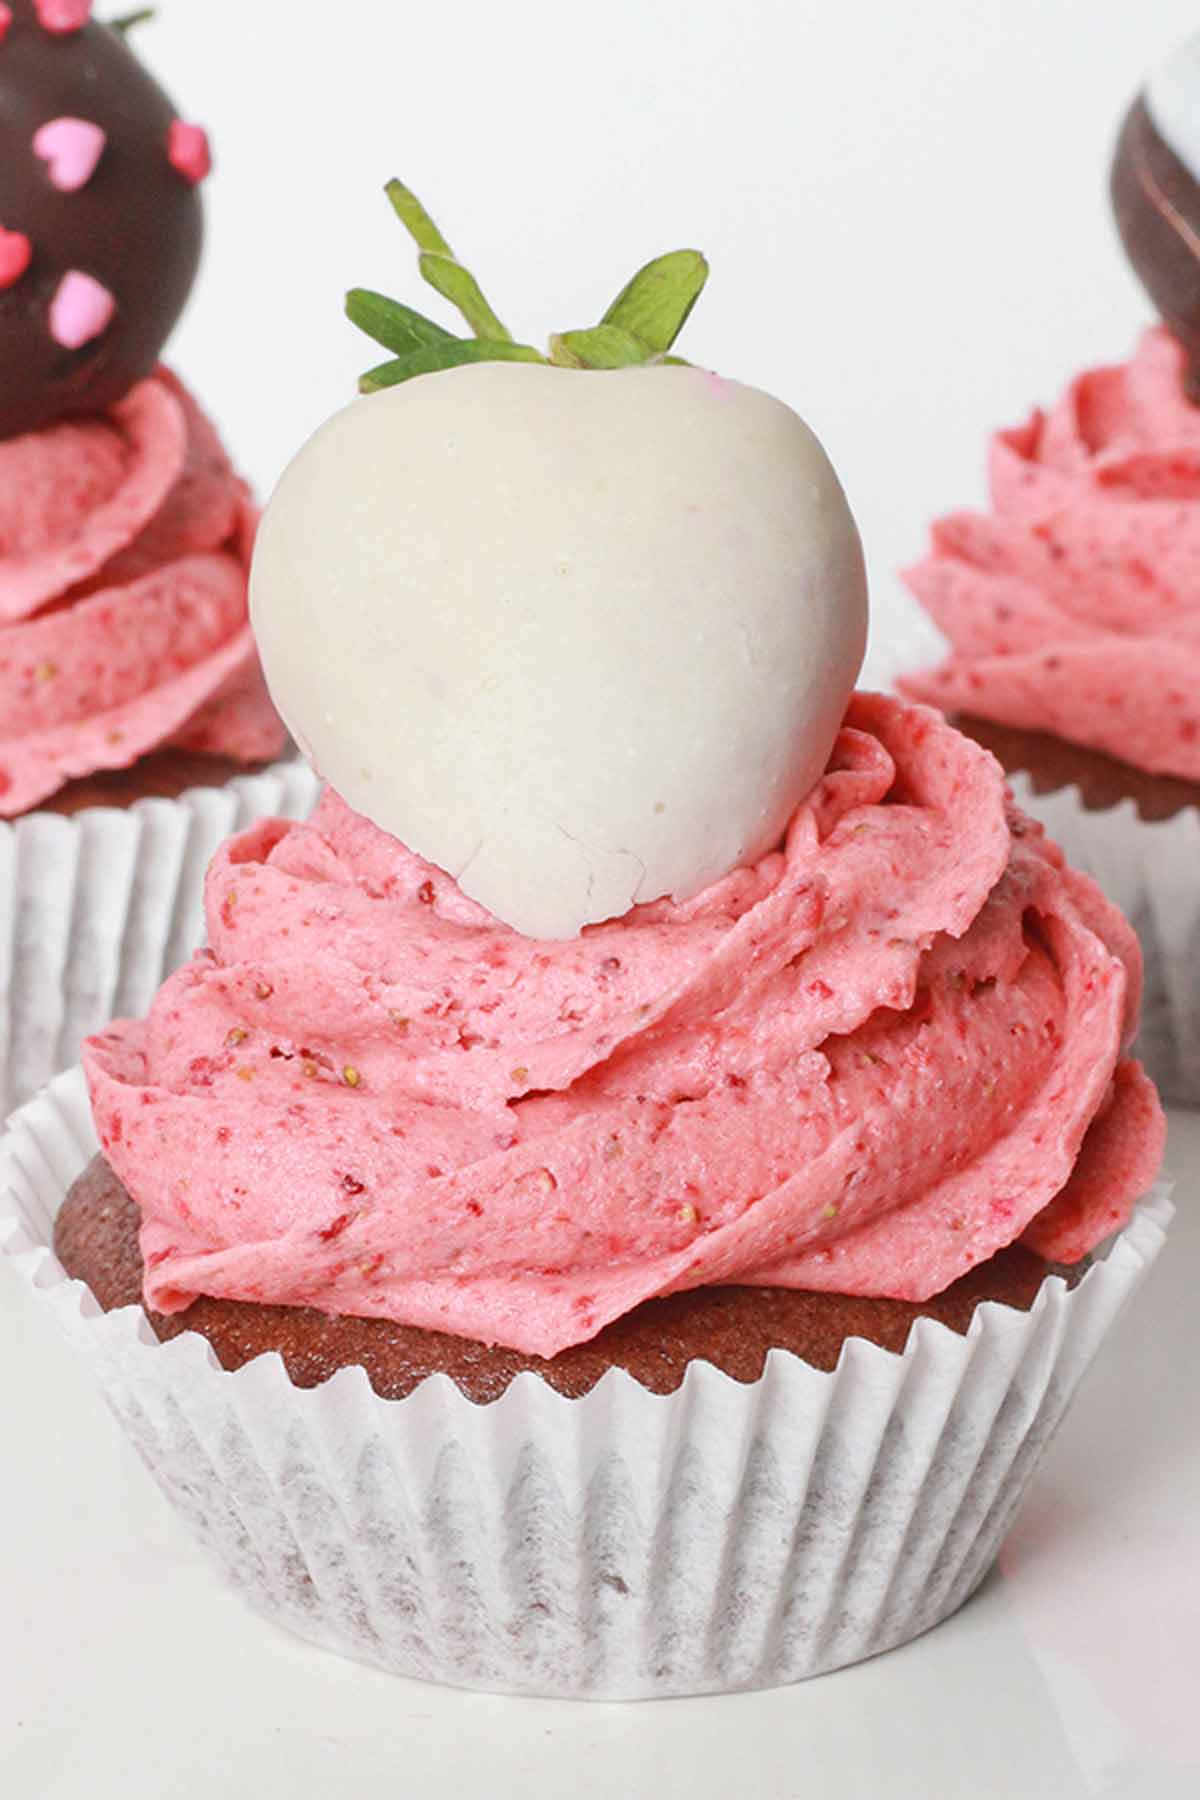 Swirl Of Strawberry Frosting Piped Onto A Cupcake